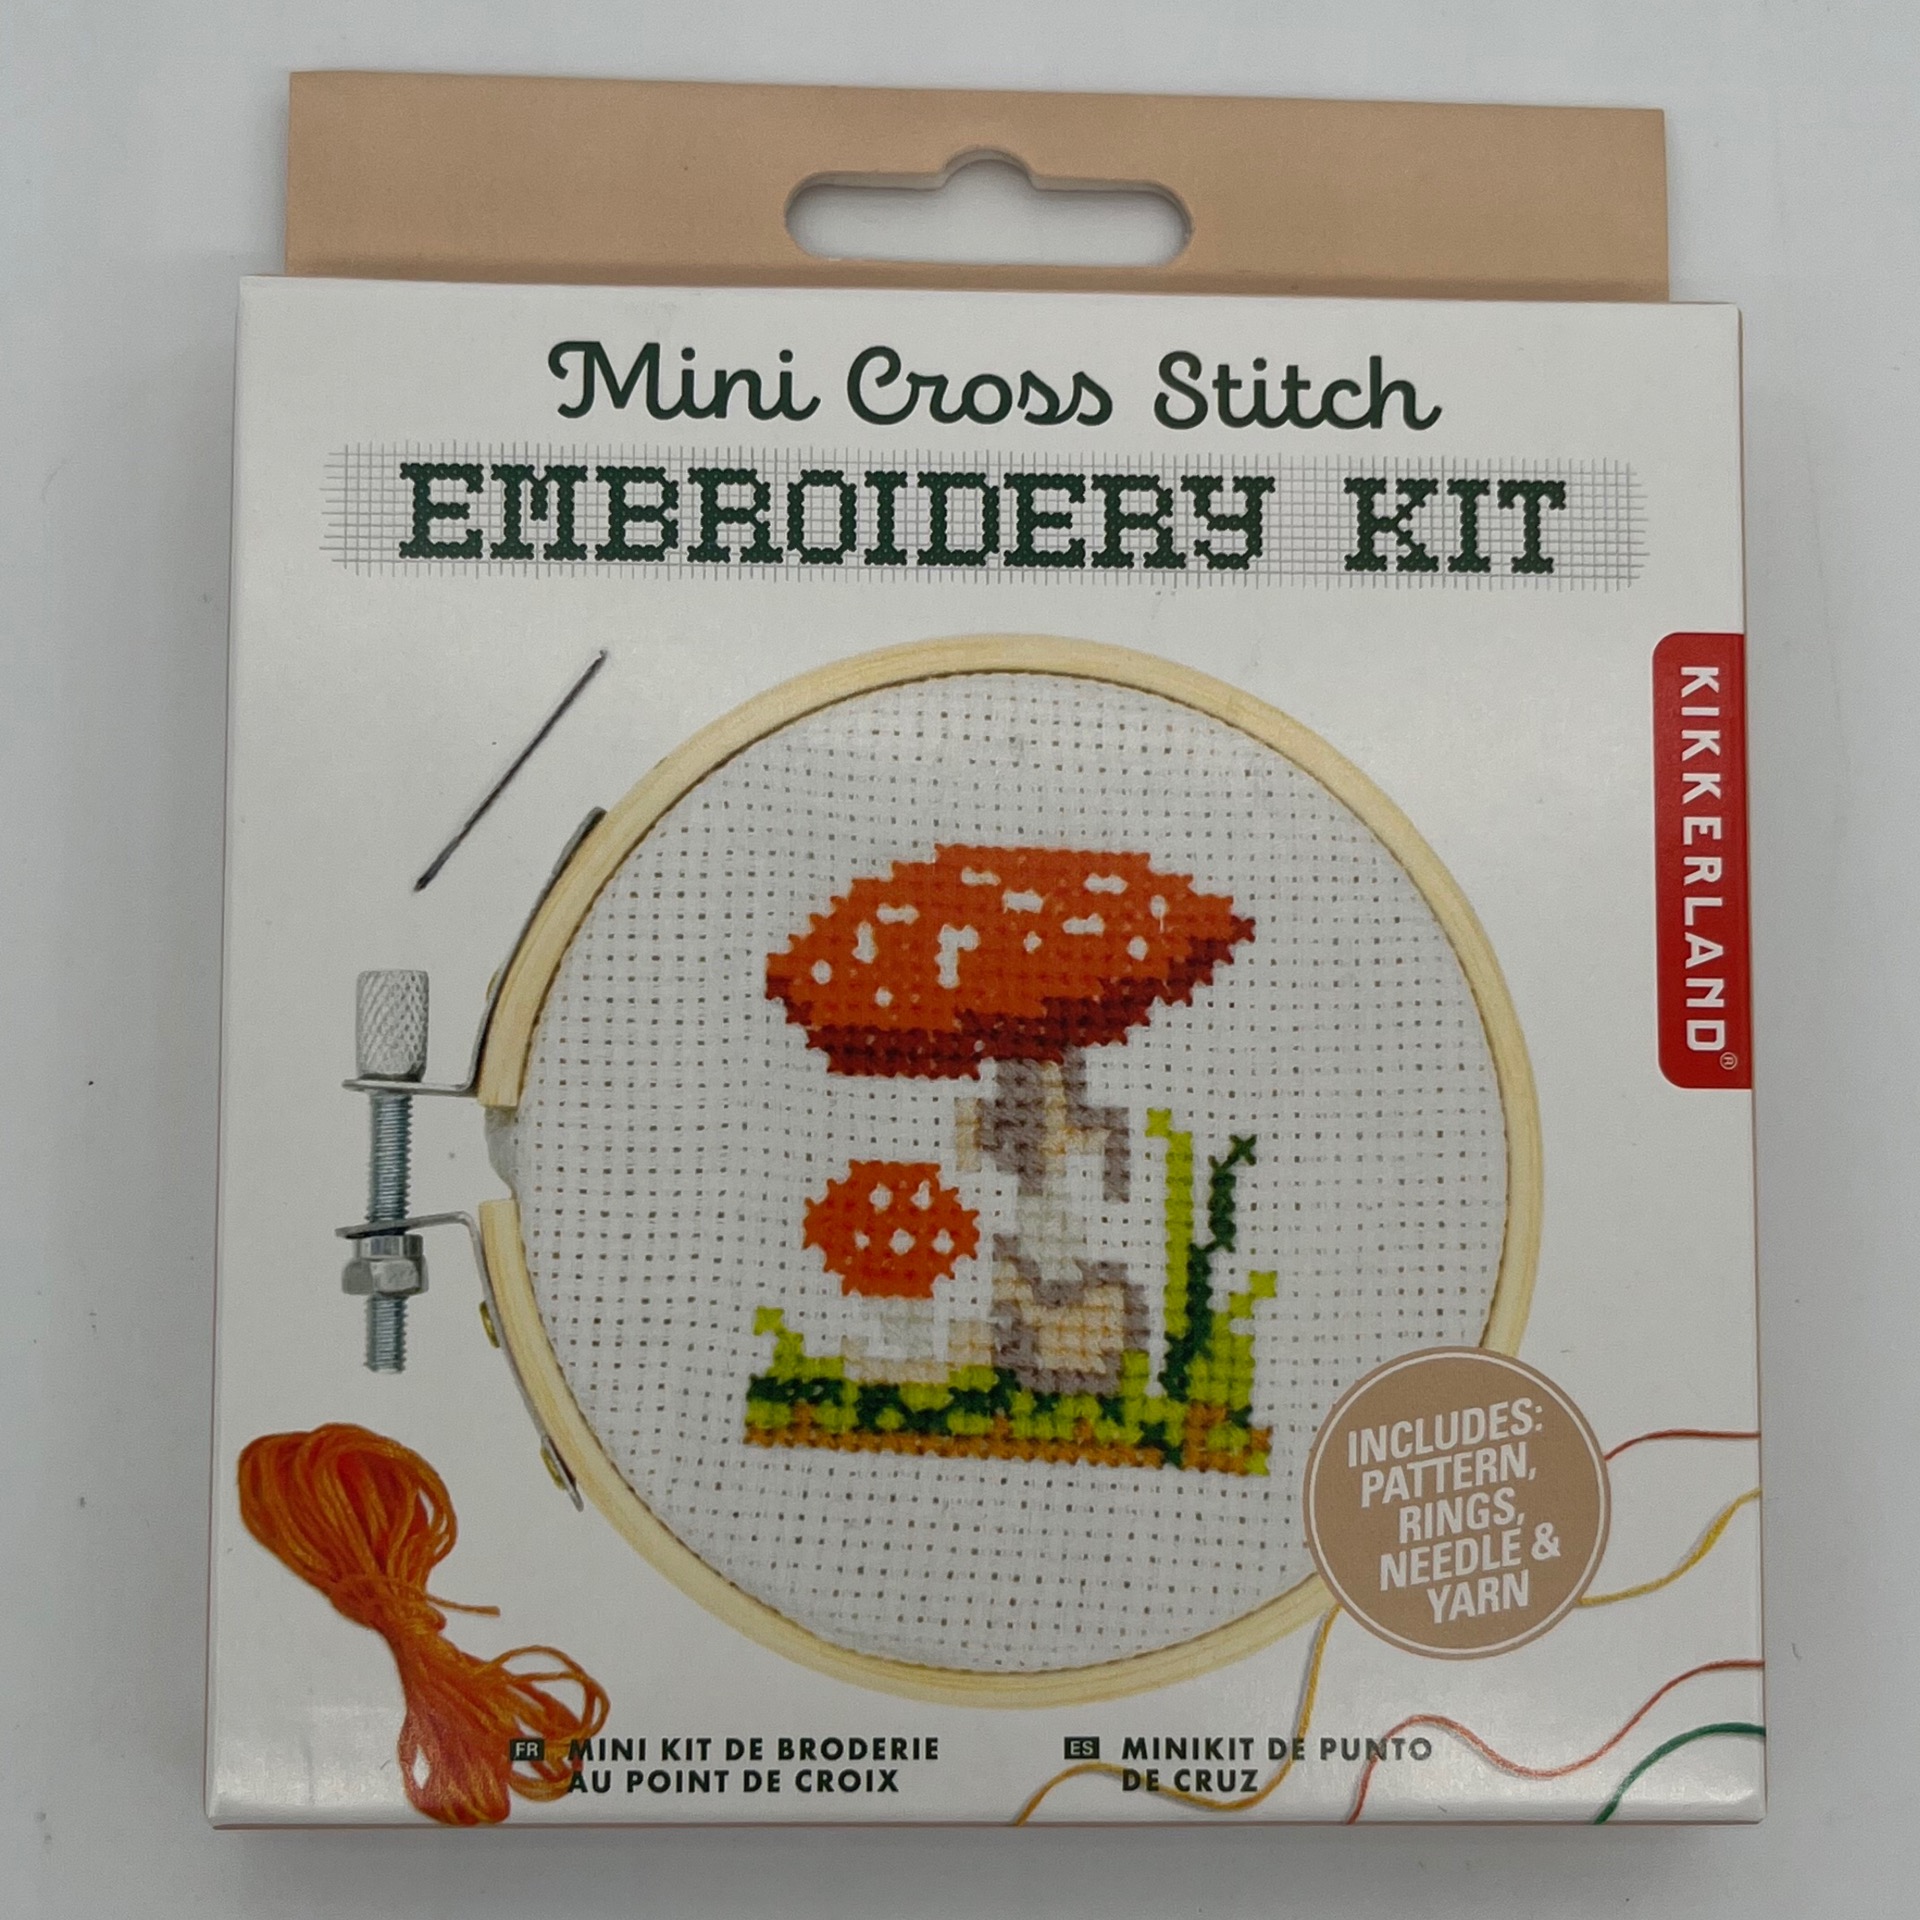 Mini Cross Stitch Kit – Mushroom – Embroidery – Act Your Age (or don't)